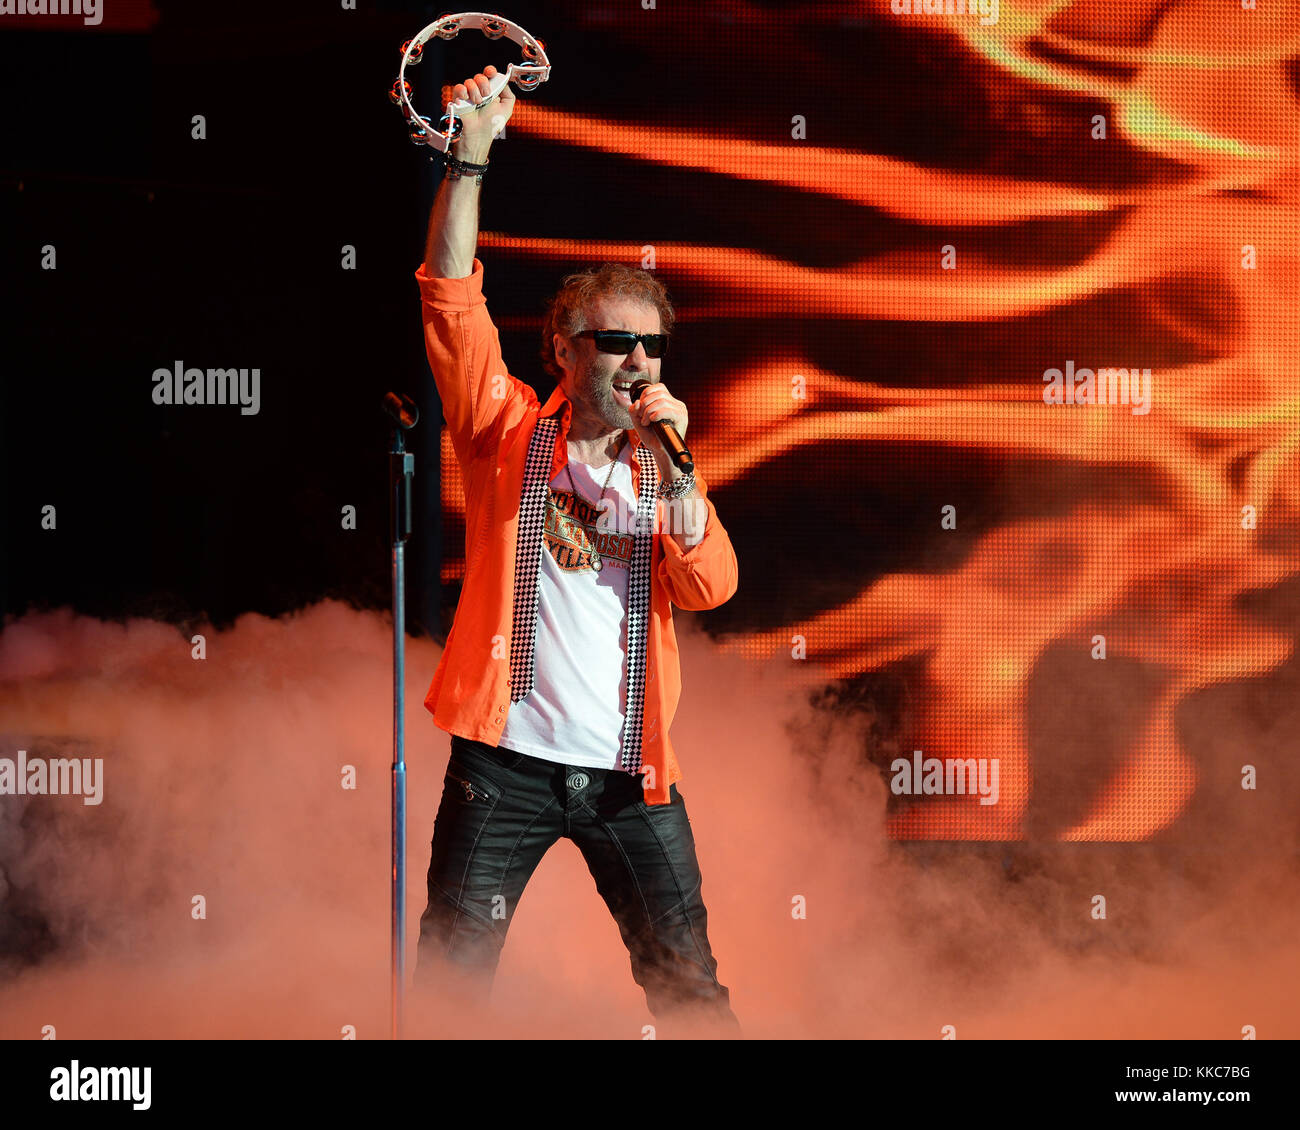 WEST PALM BEACH, FL - MAY 29: Paul Rodgers of Bad Company performs at The Perfect Vodka Amphitheater on May 29, 2016 in West Palm Beach Florida   People:  Paul Rodgers Stock Photo